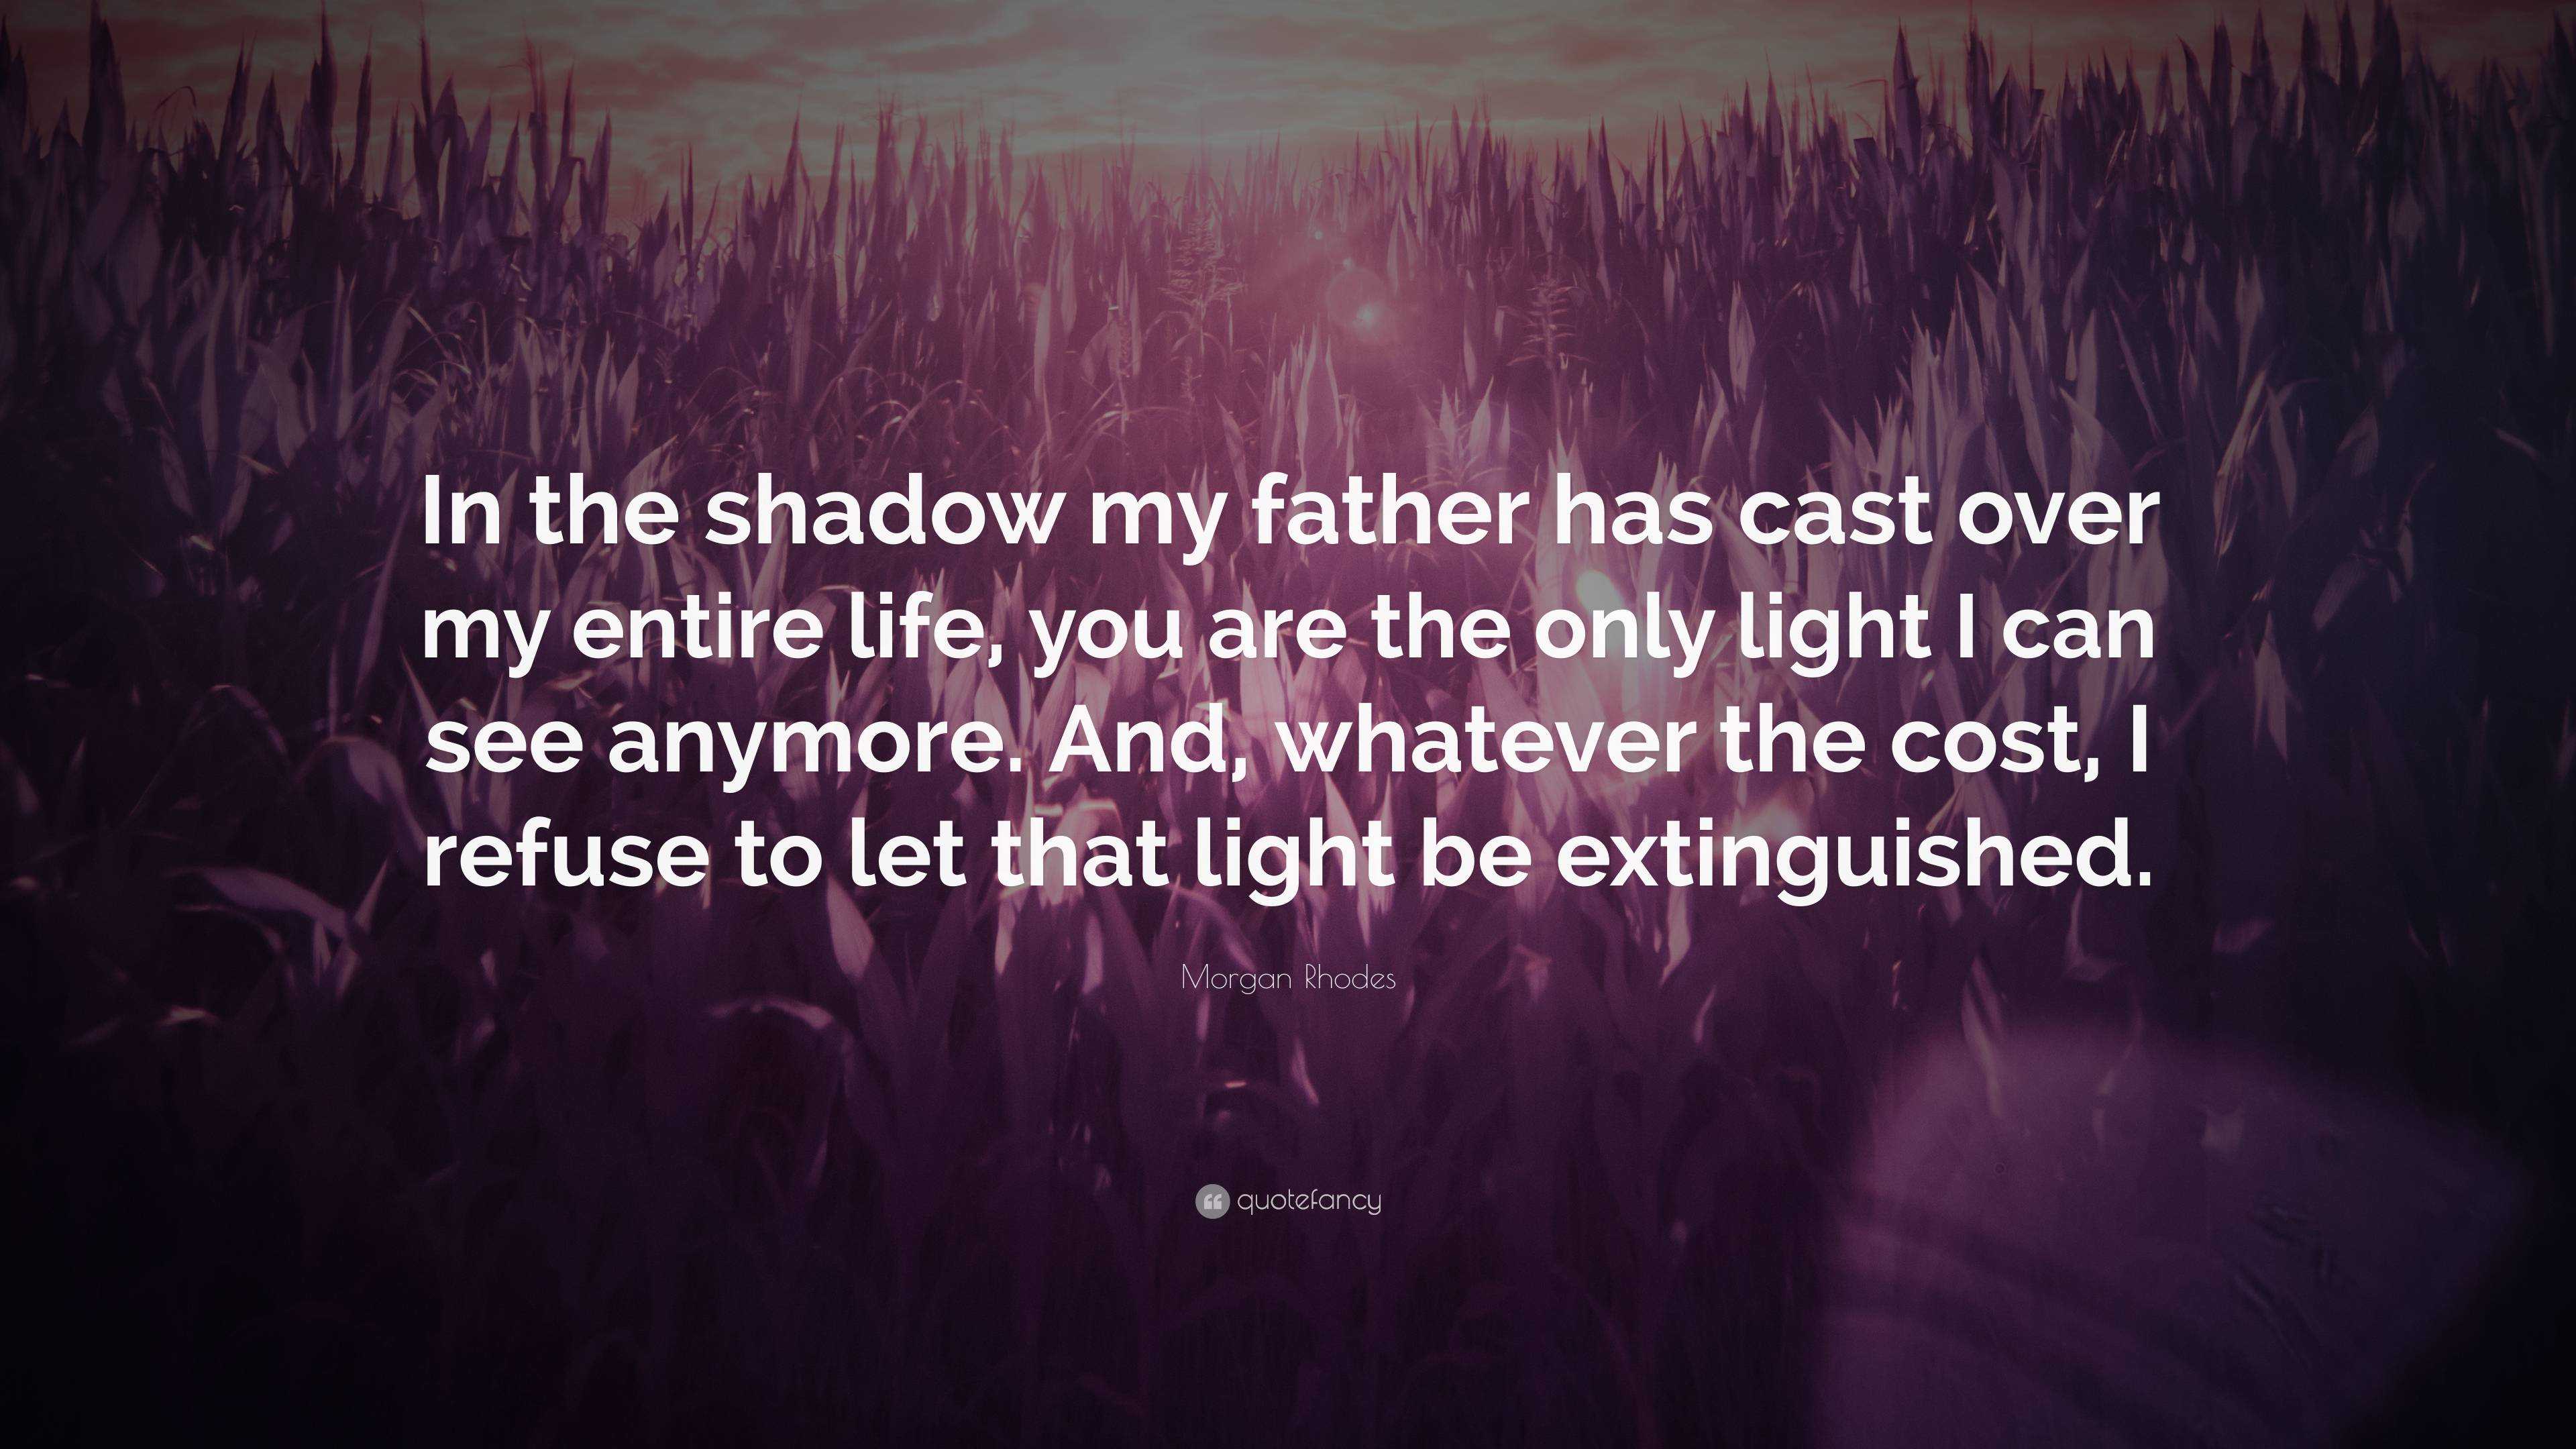 Morgan Rhodes Quote: “In the shadow my father has cast over entire life, you are the only light I can see anymore. And, the cost, ...”